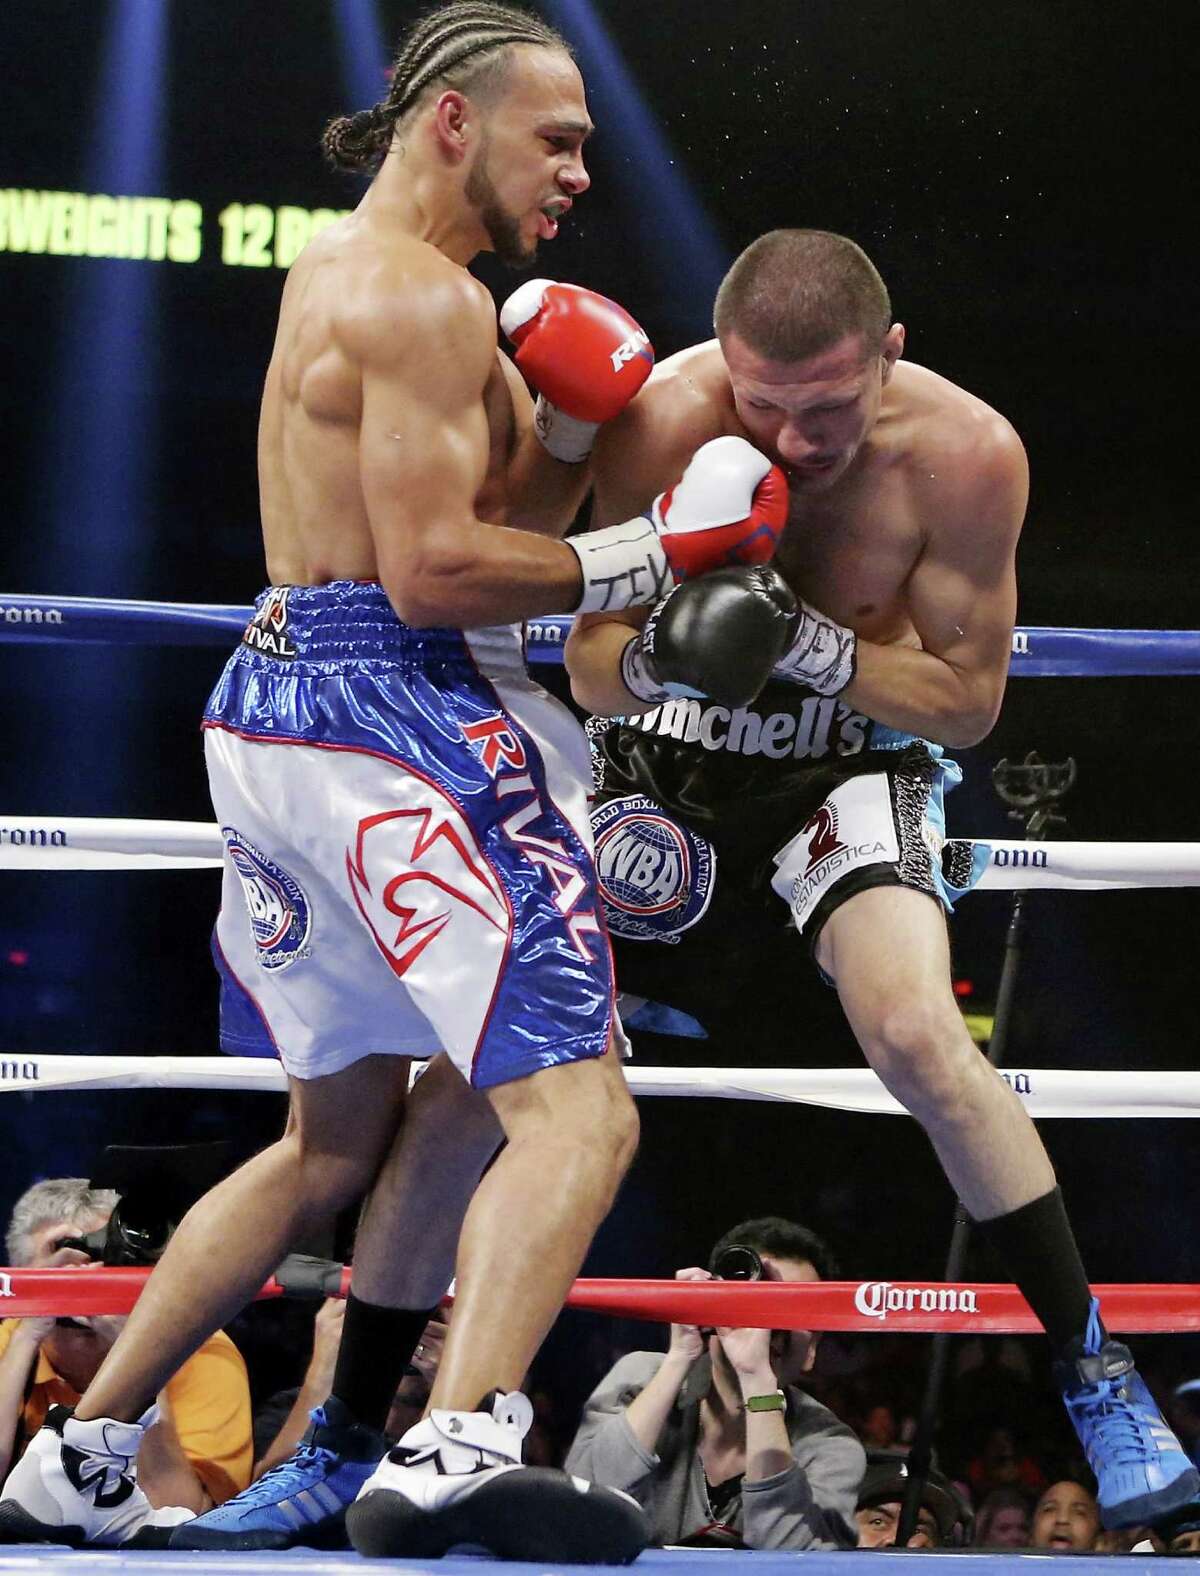 Keith Thurman (left) hits Jesus Soto Karass during their WBA interim welterweight fight — part of the “Danger Zone” boxing card — on Dec. 14, 2013 at the Alamodome.